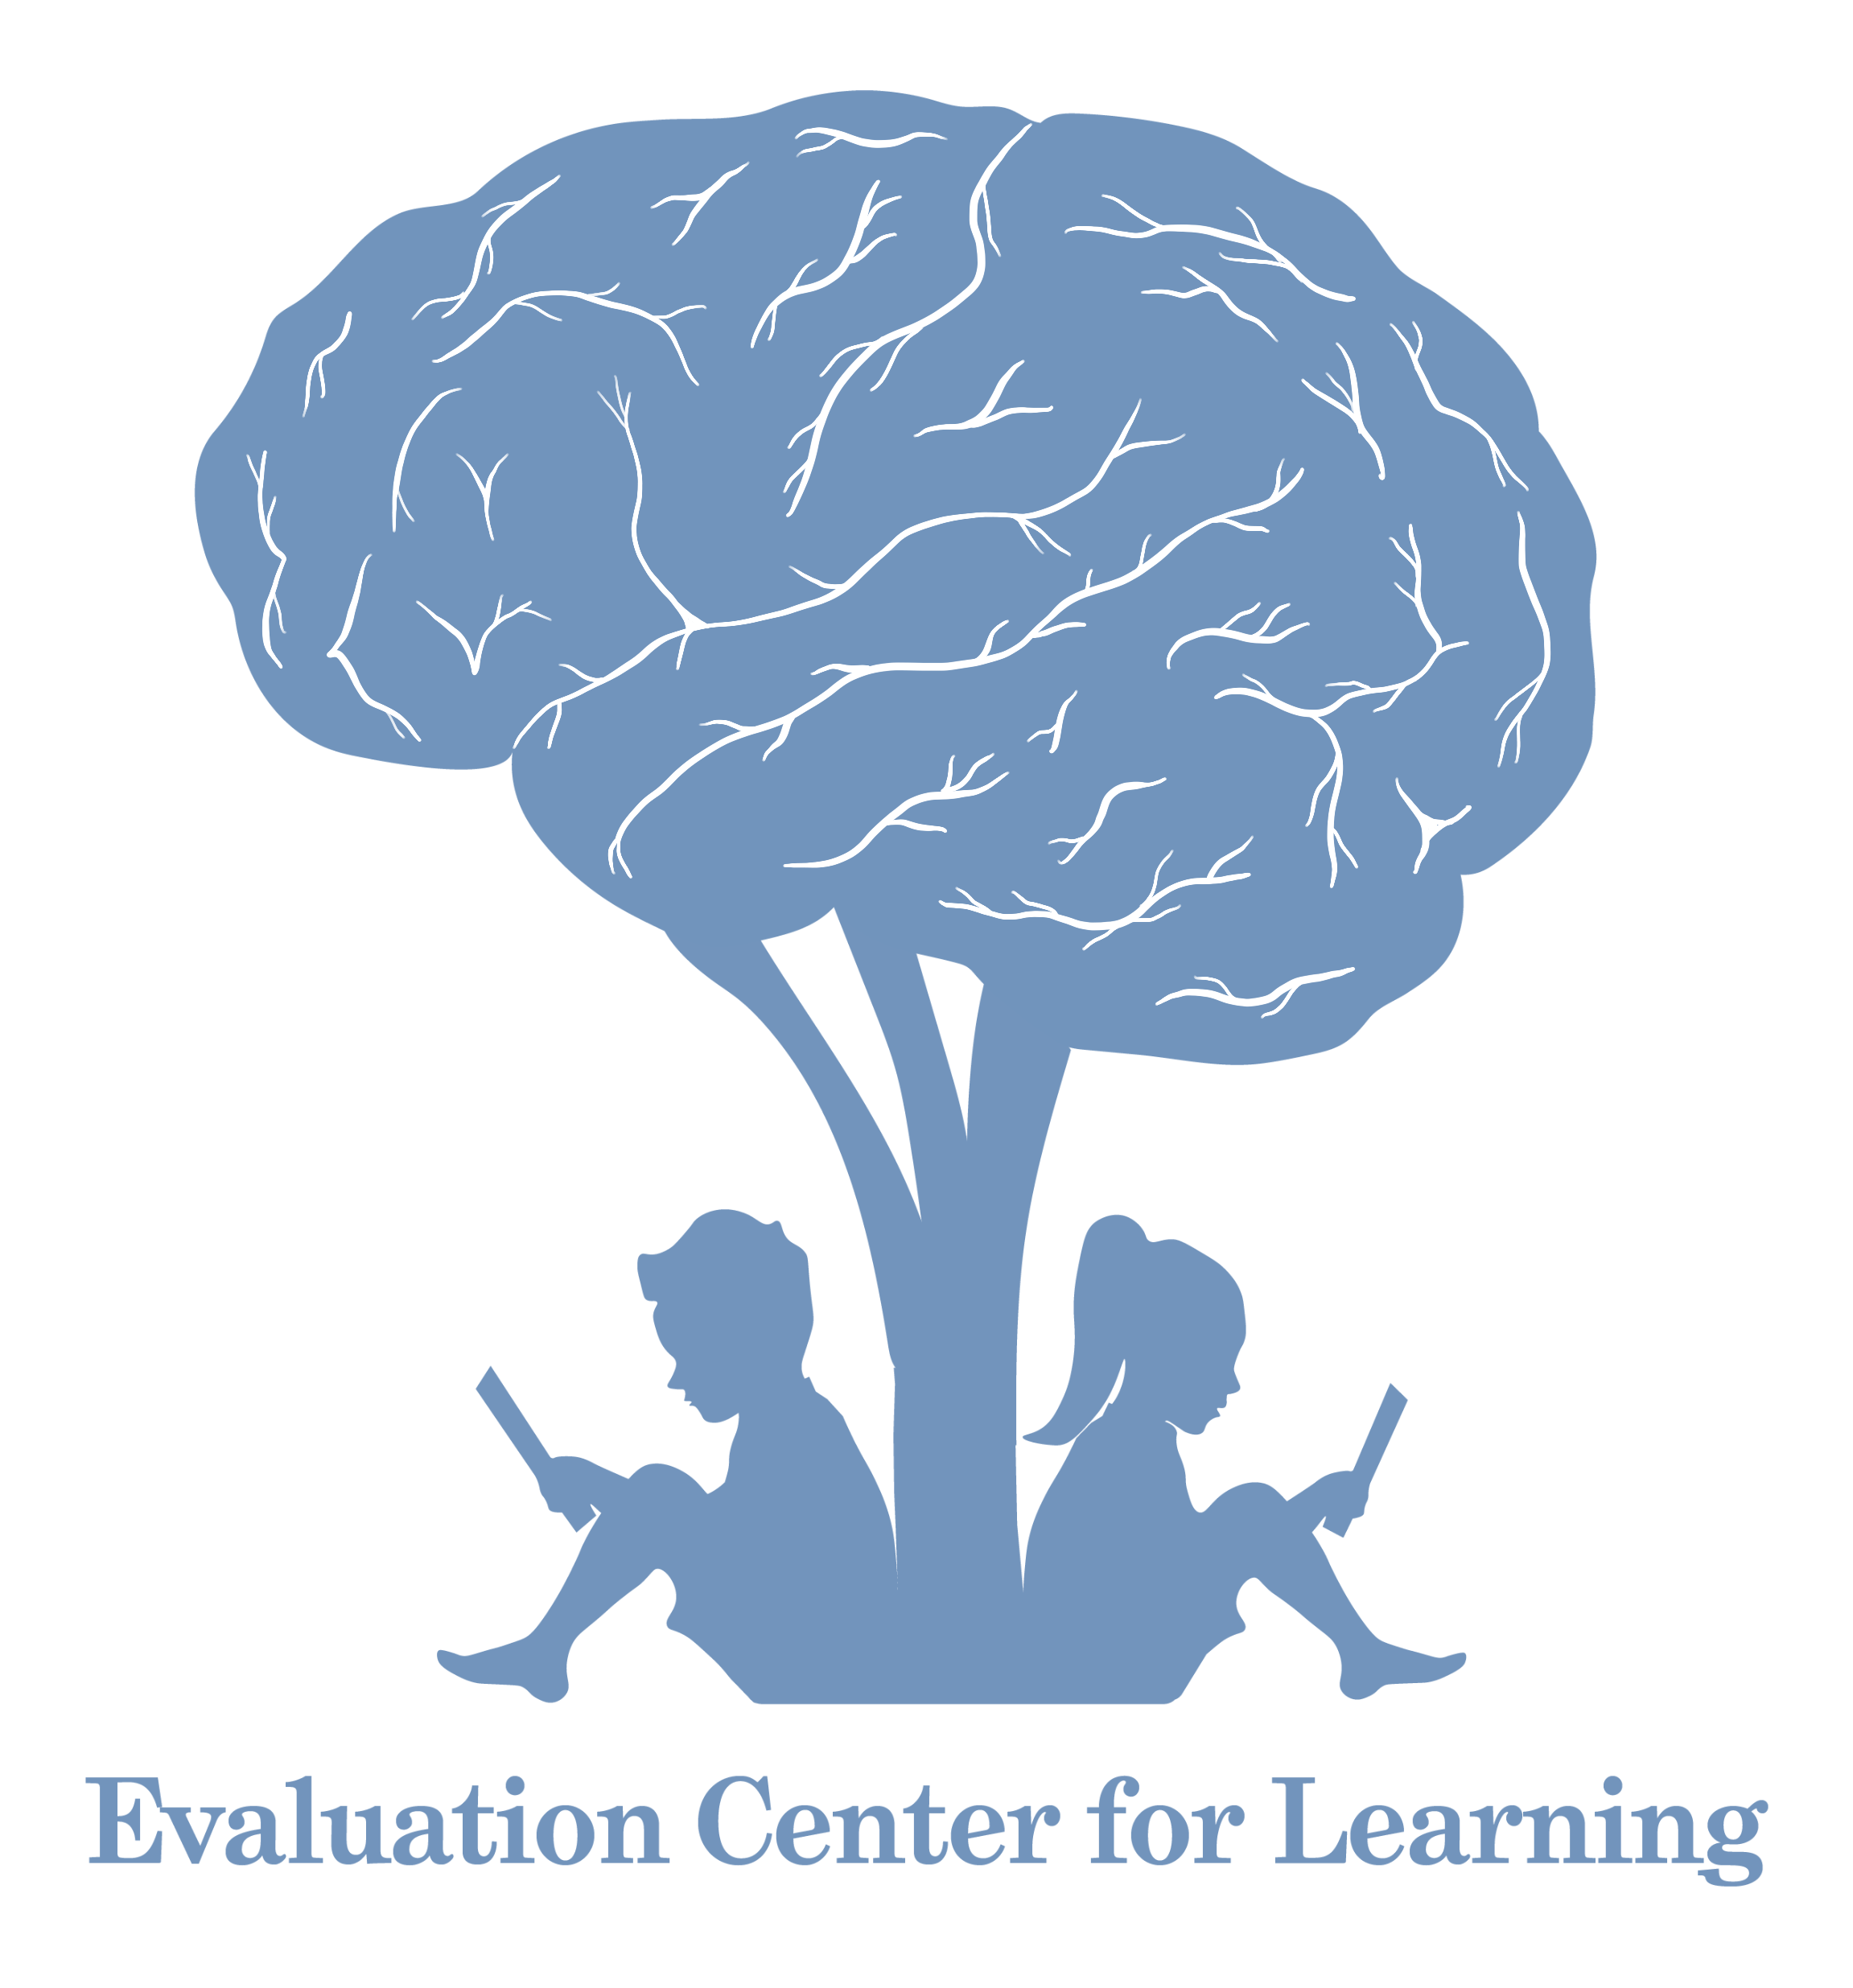 Evaluation Center for Learning